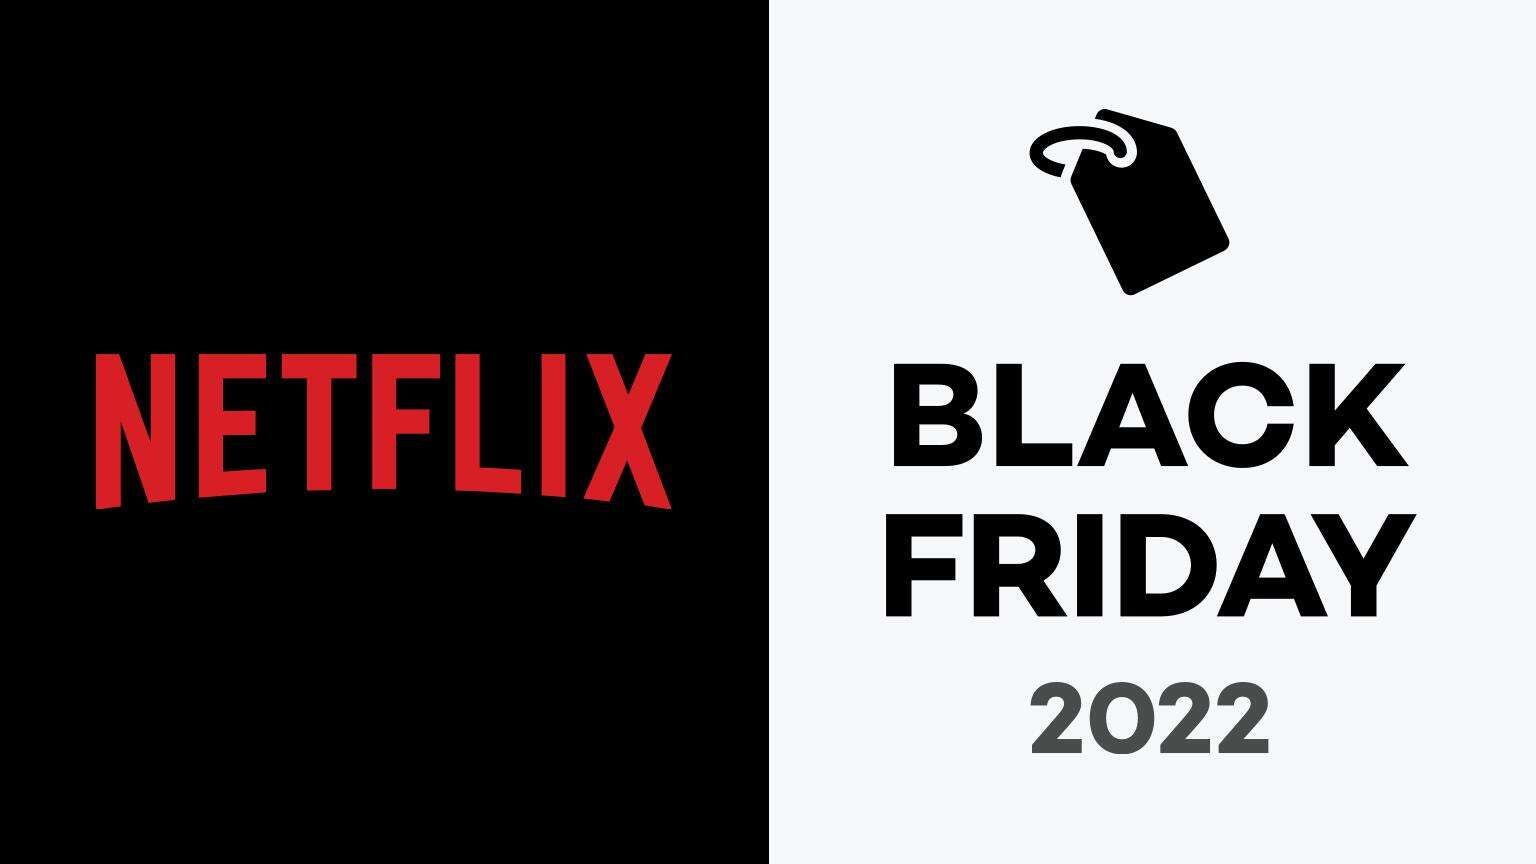 Netflix Black Friday & Cyber Monday 2022 Deals and Sales What Are the